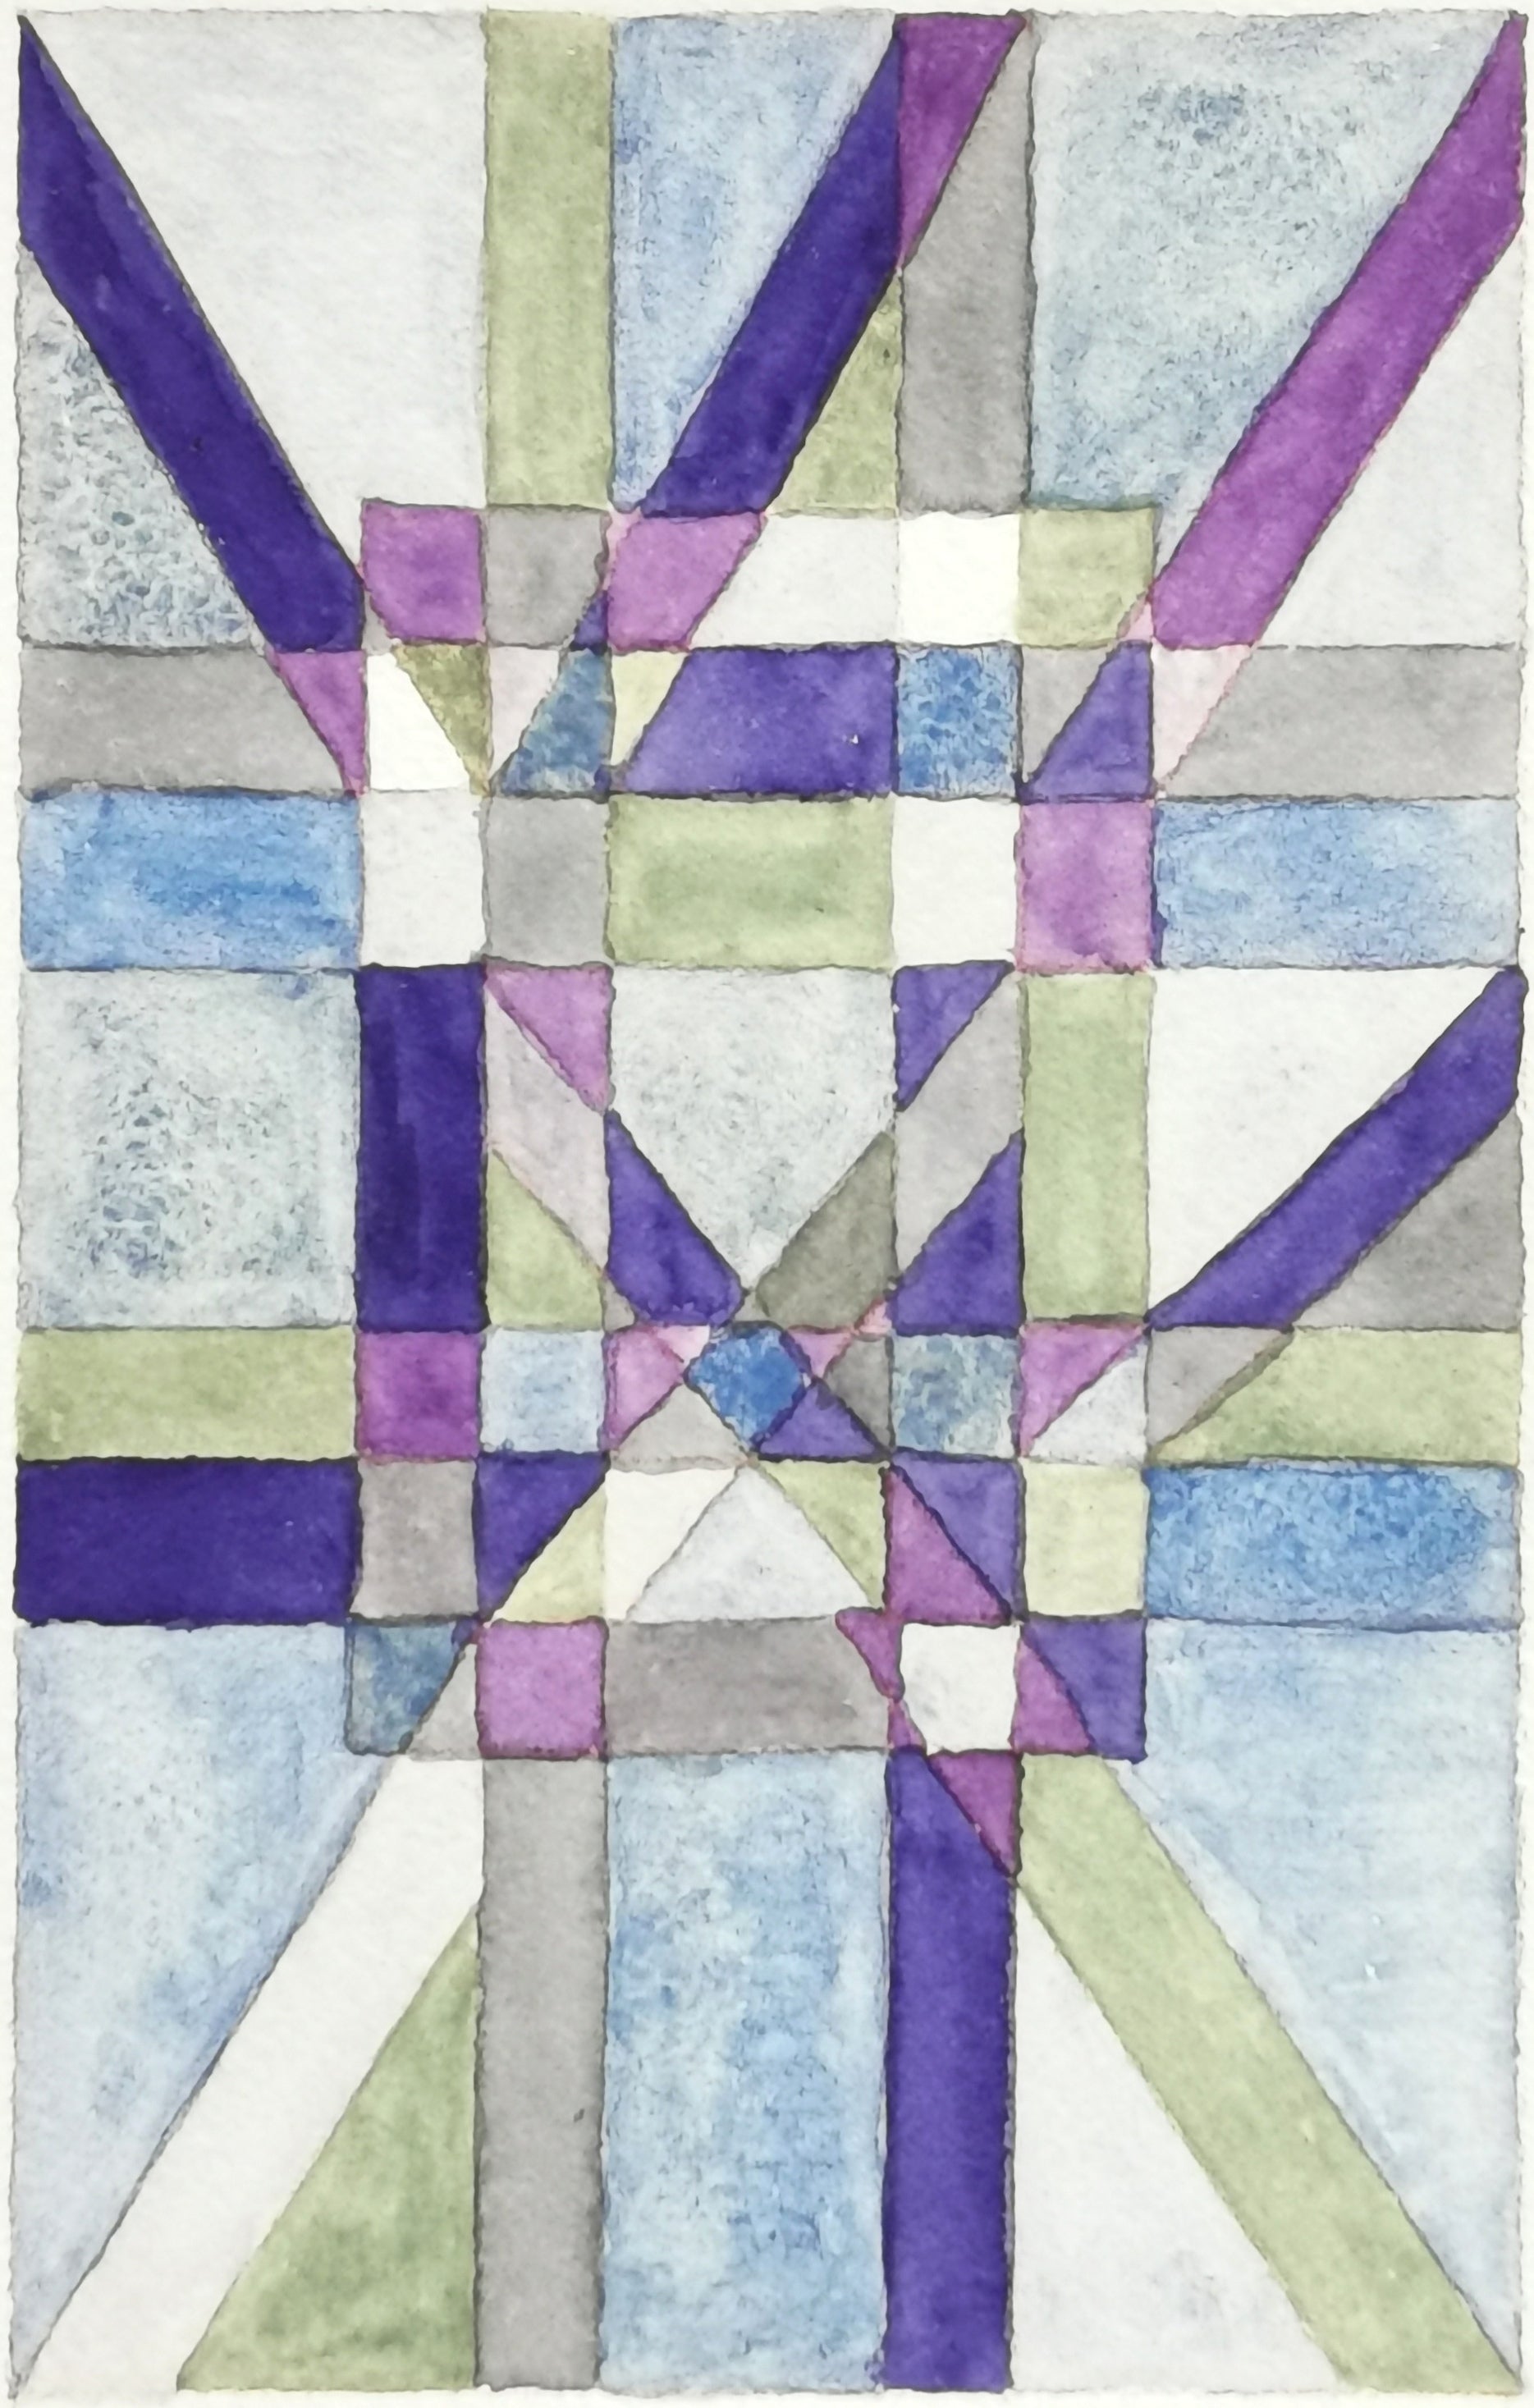 'WEIGHTINGS IN THE SYSTEM 12' - Watercolor on paper